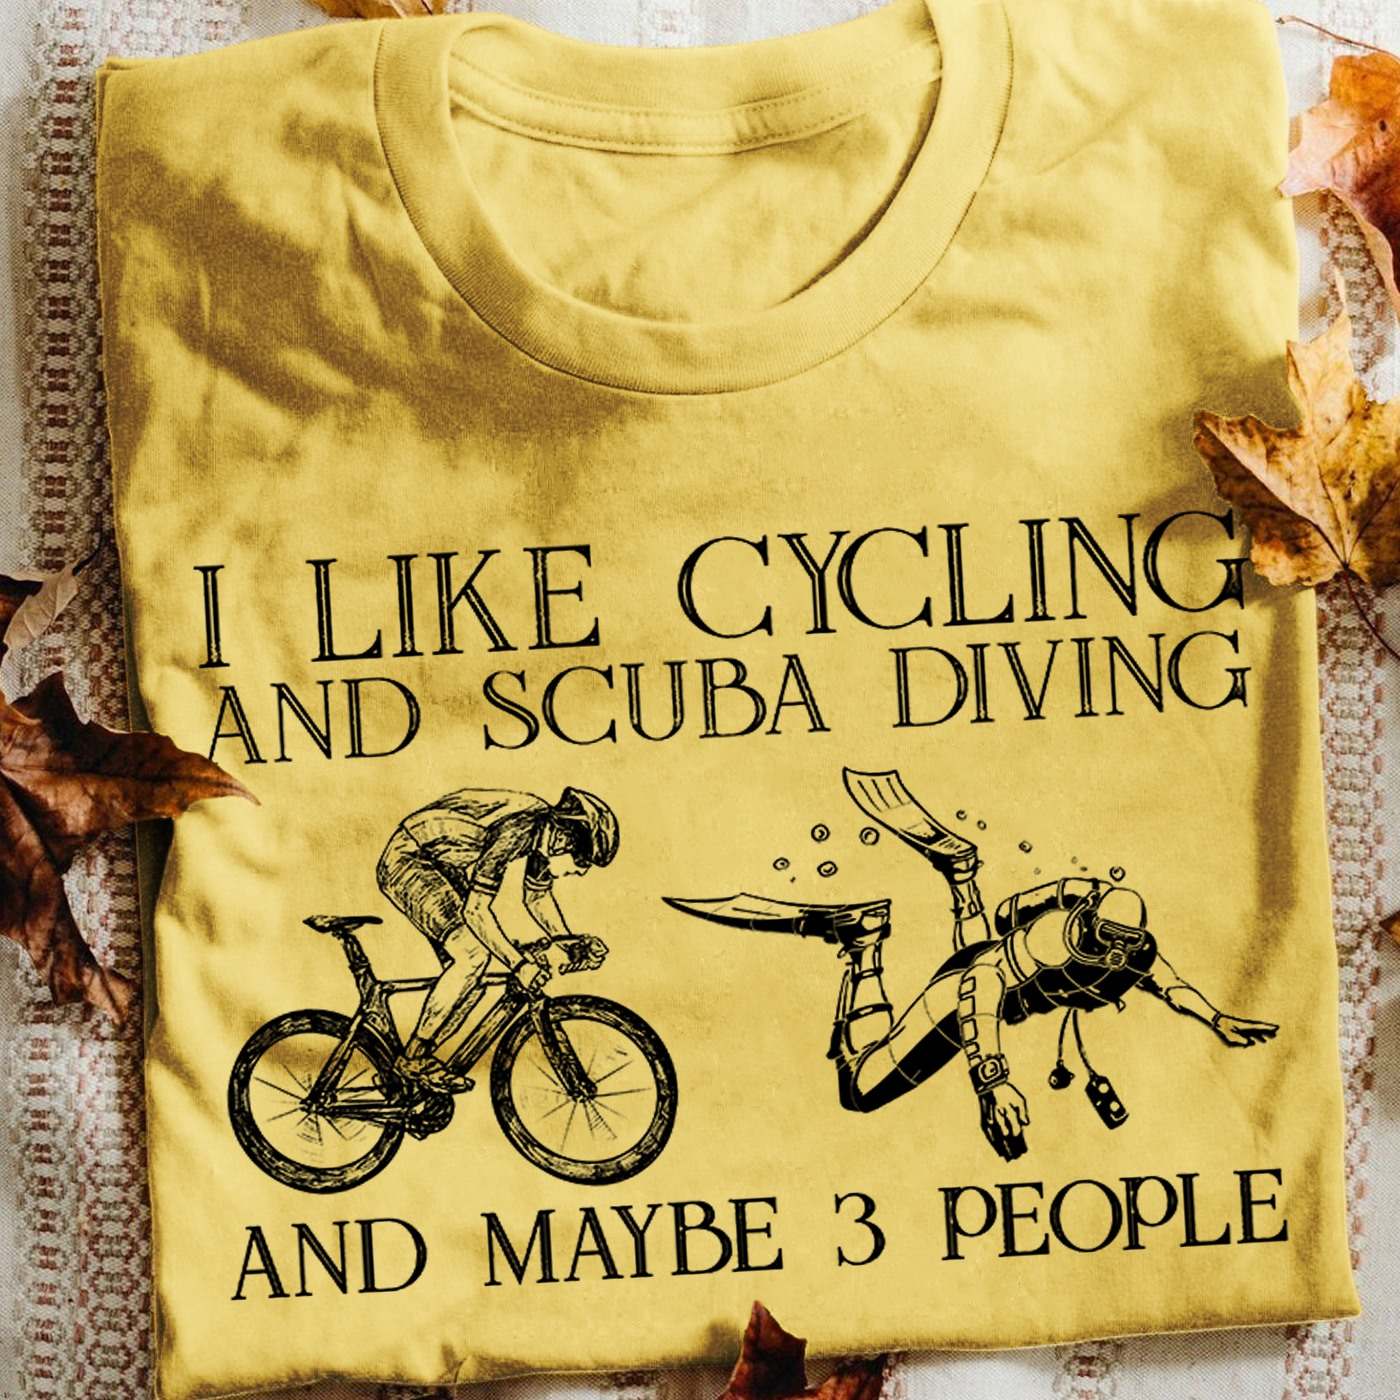 I like cycling and scuba diving and maybe 3 people - Love scuba diving